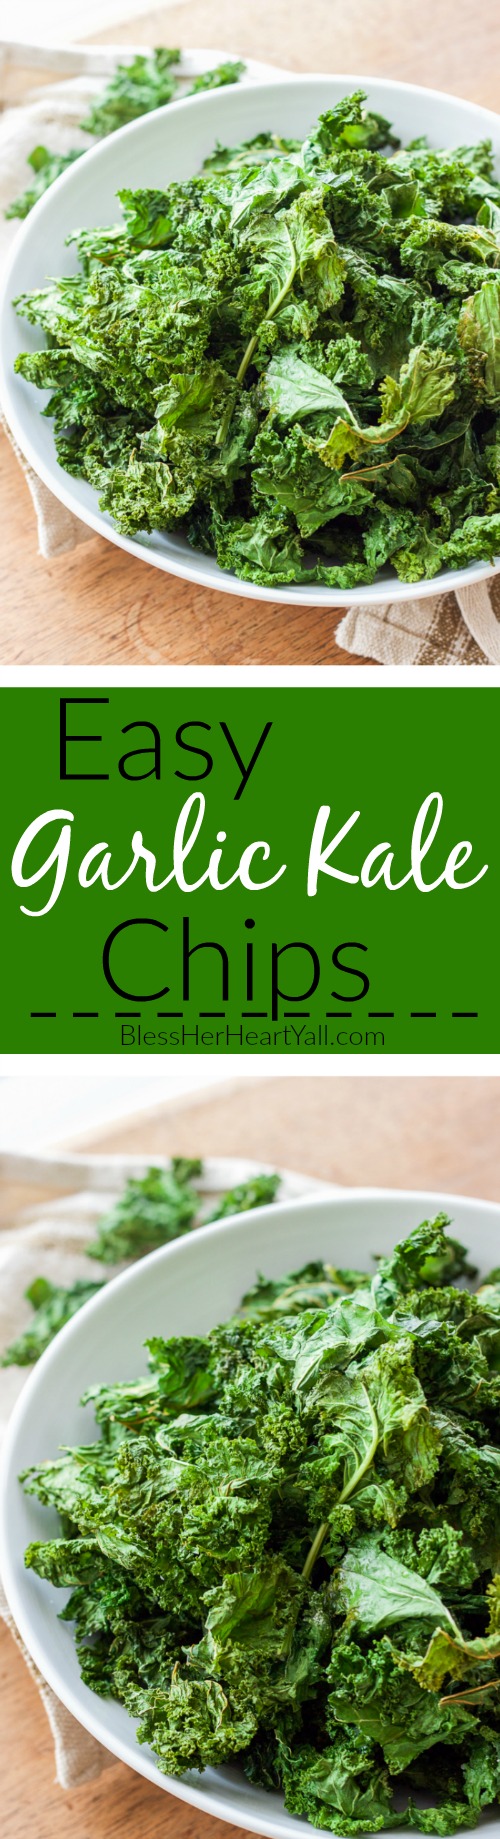 garlic kale chips | garlic, crunchy, healthy, and gluten-free! Made in minutes! OMG so good!